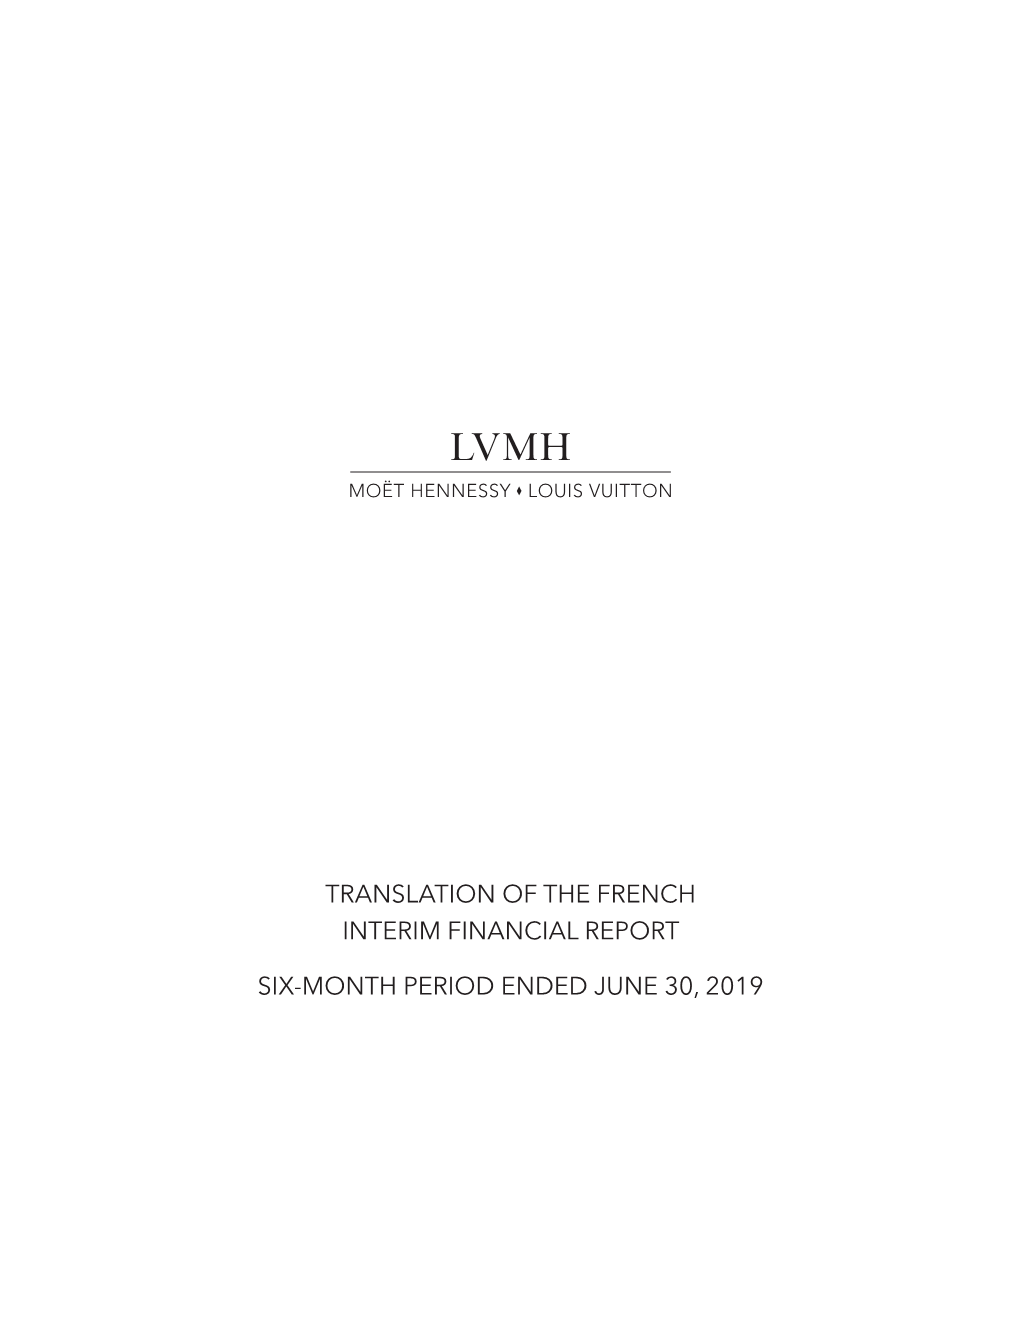 Translation of the French Interim Financial Report